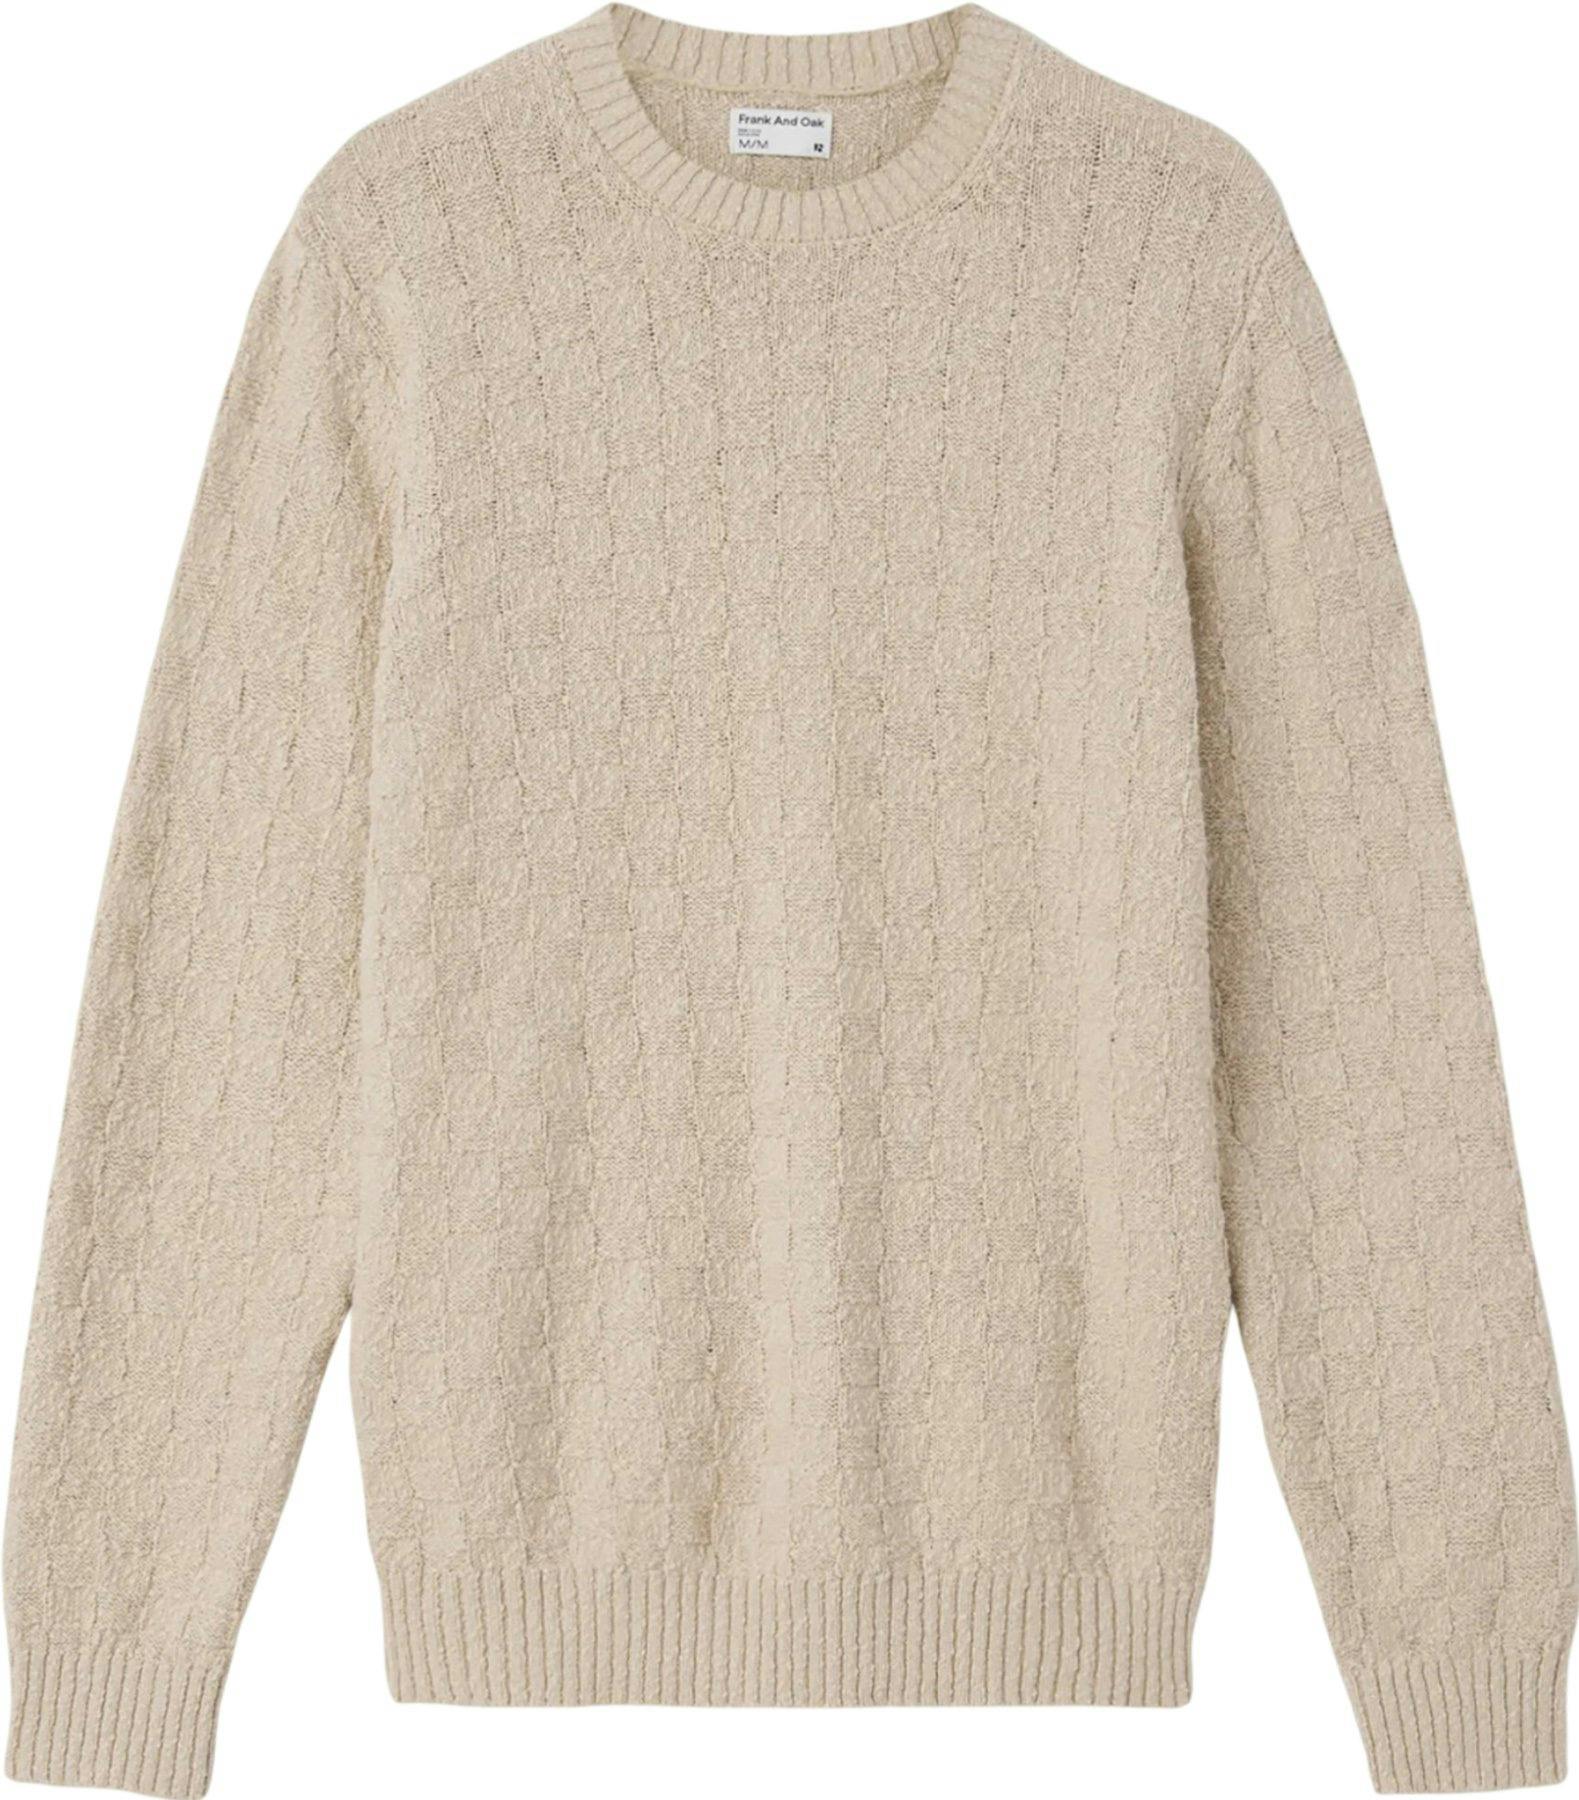 Product image for Basketweave Sweater - Men's